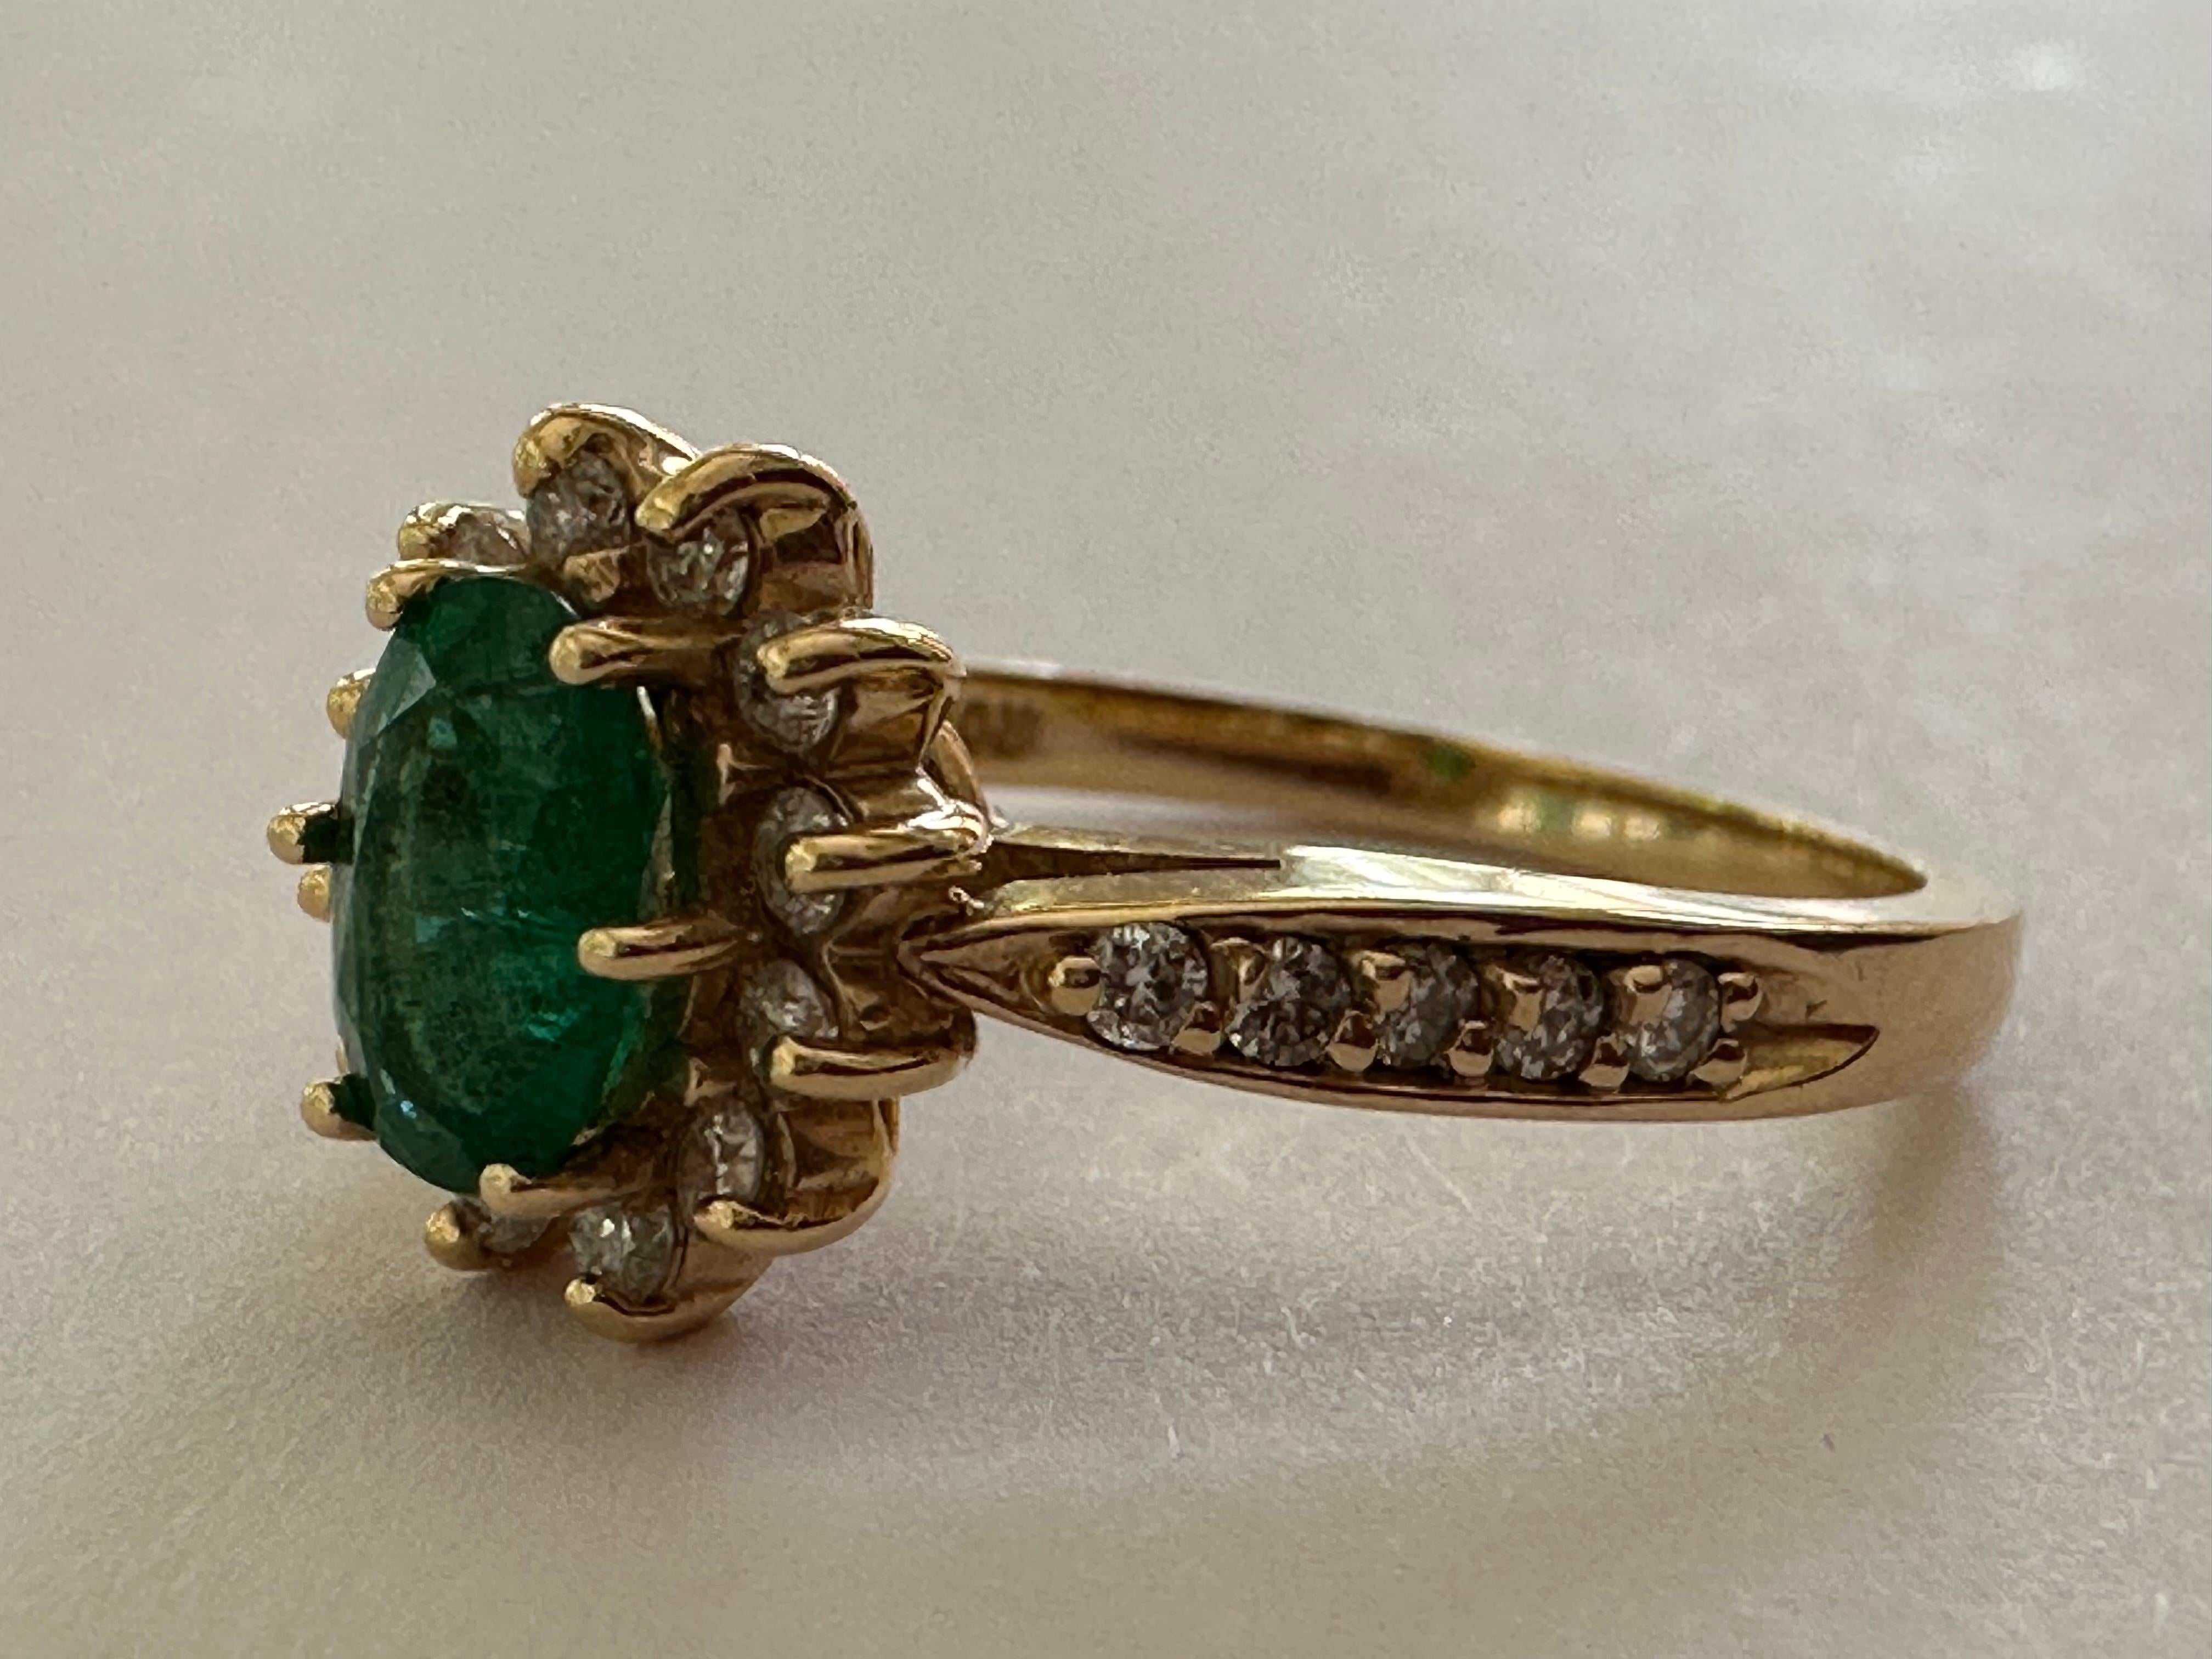 Crafted in the 1940s, this Retro-era ring features a beautiful 0.75-carat natural green emerald. The oval-cut gem is surrounded by 0.40 carats of sparkling round diamonds and set in 14K yellow gold. 